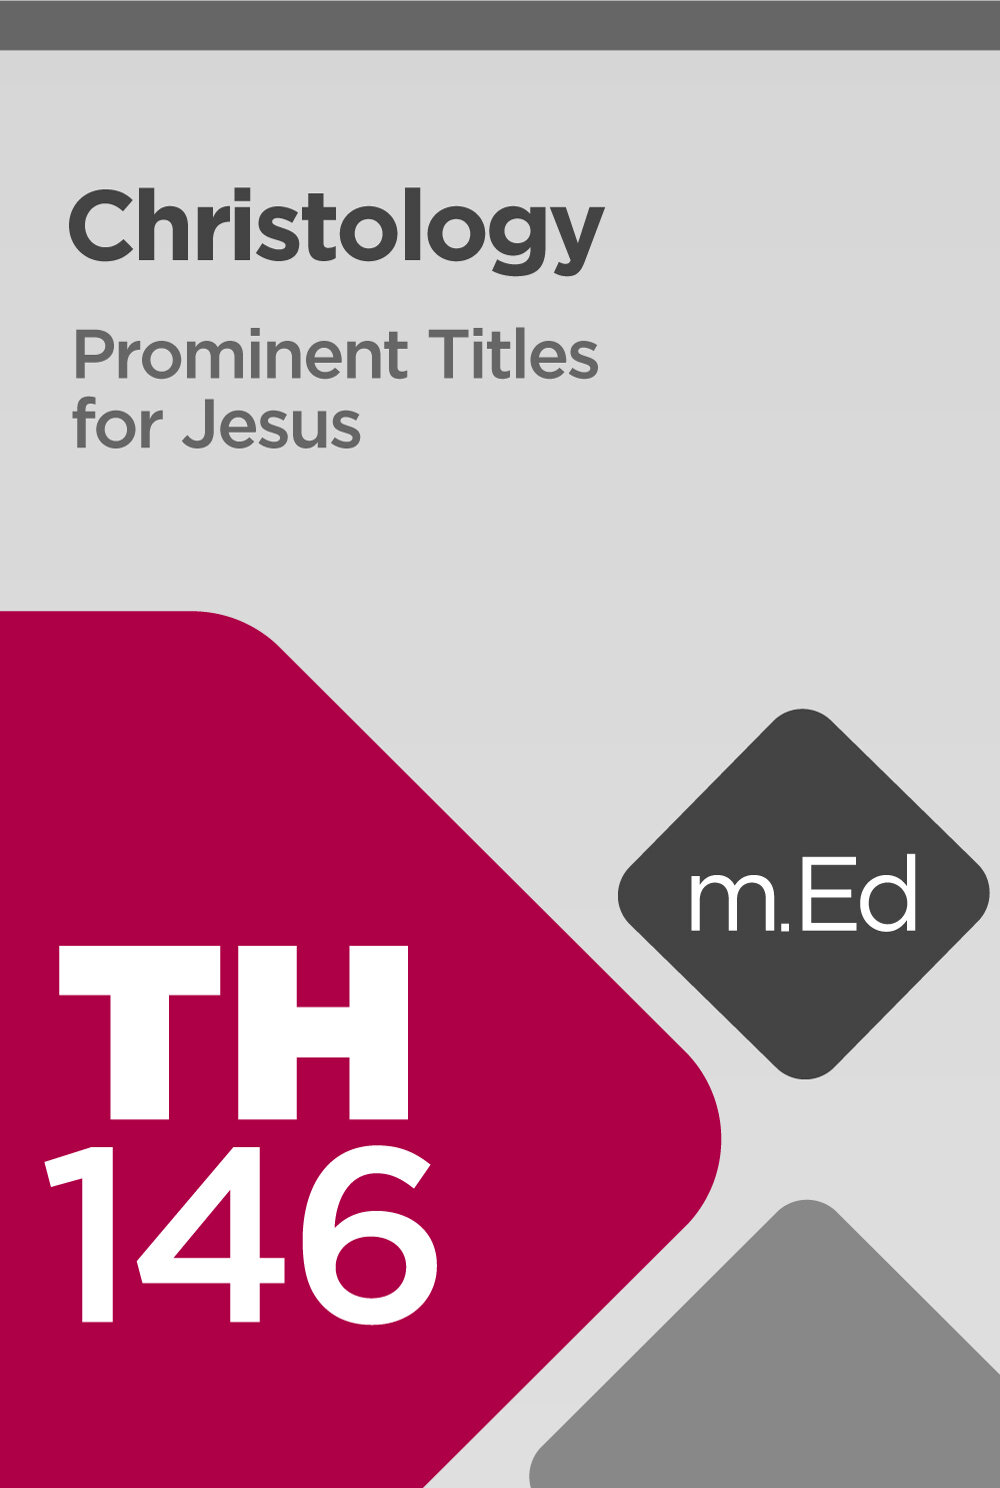 Mobile Ed: TH146 Christology: Prominent Titles for Jesus (2 hour course)